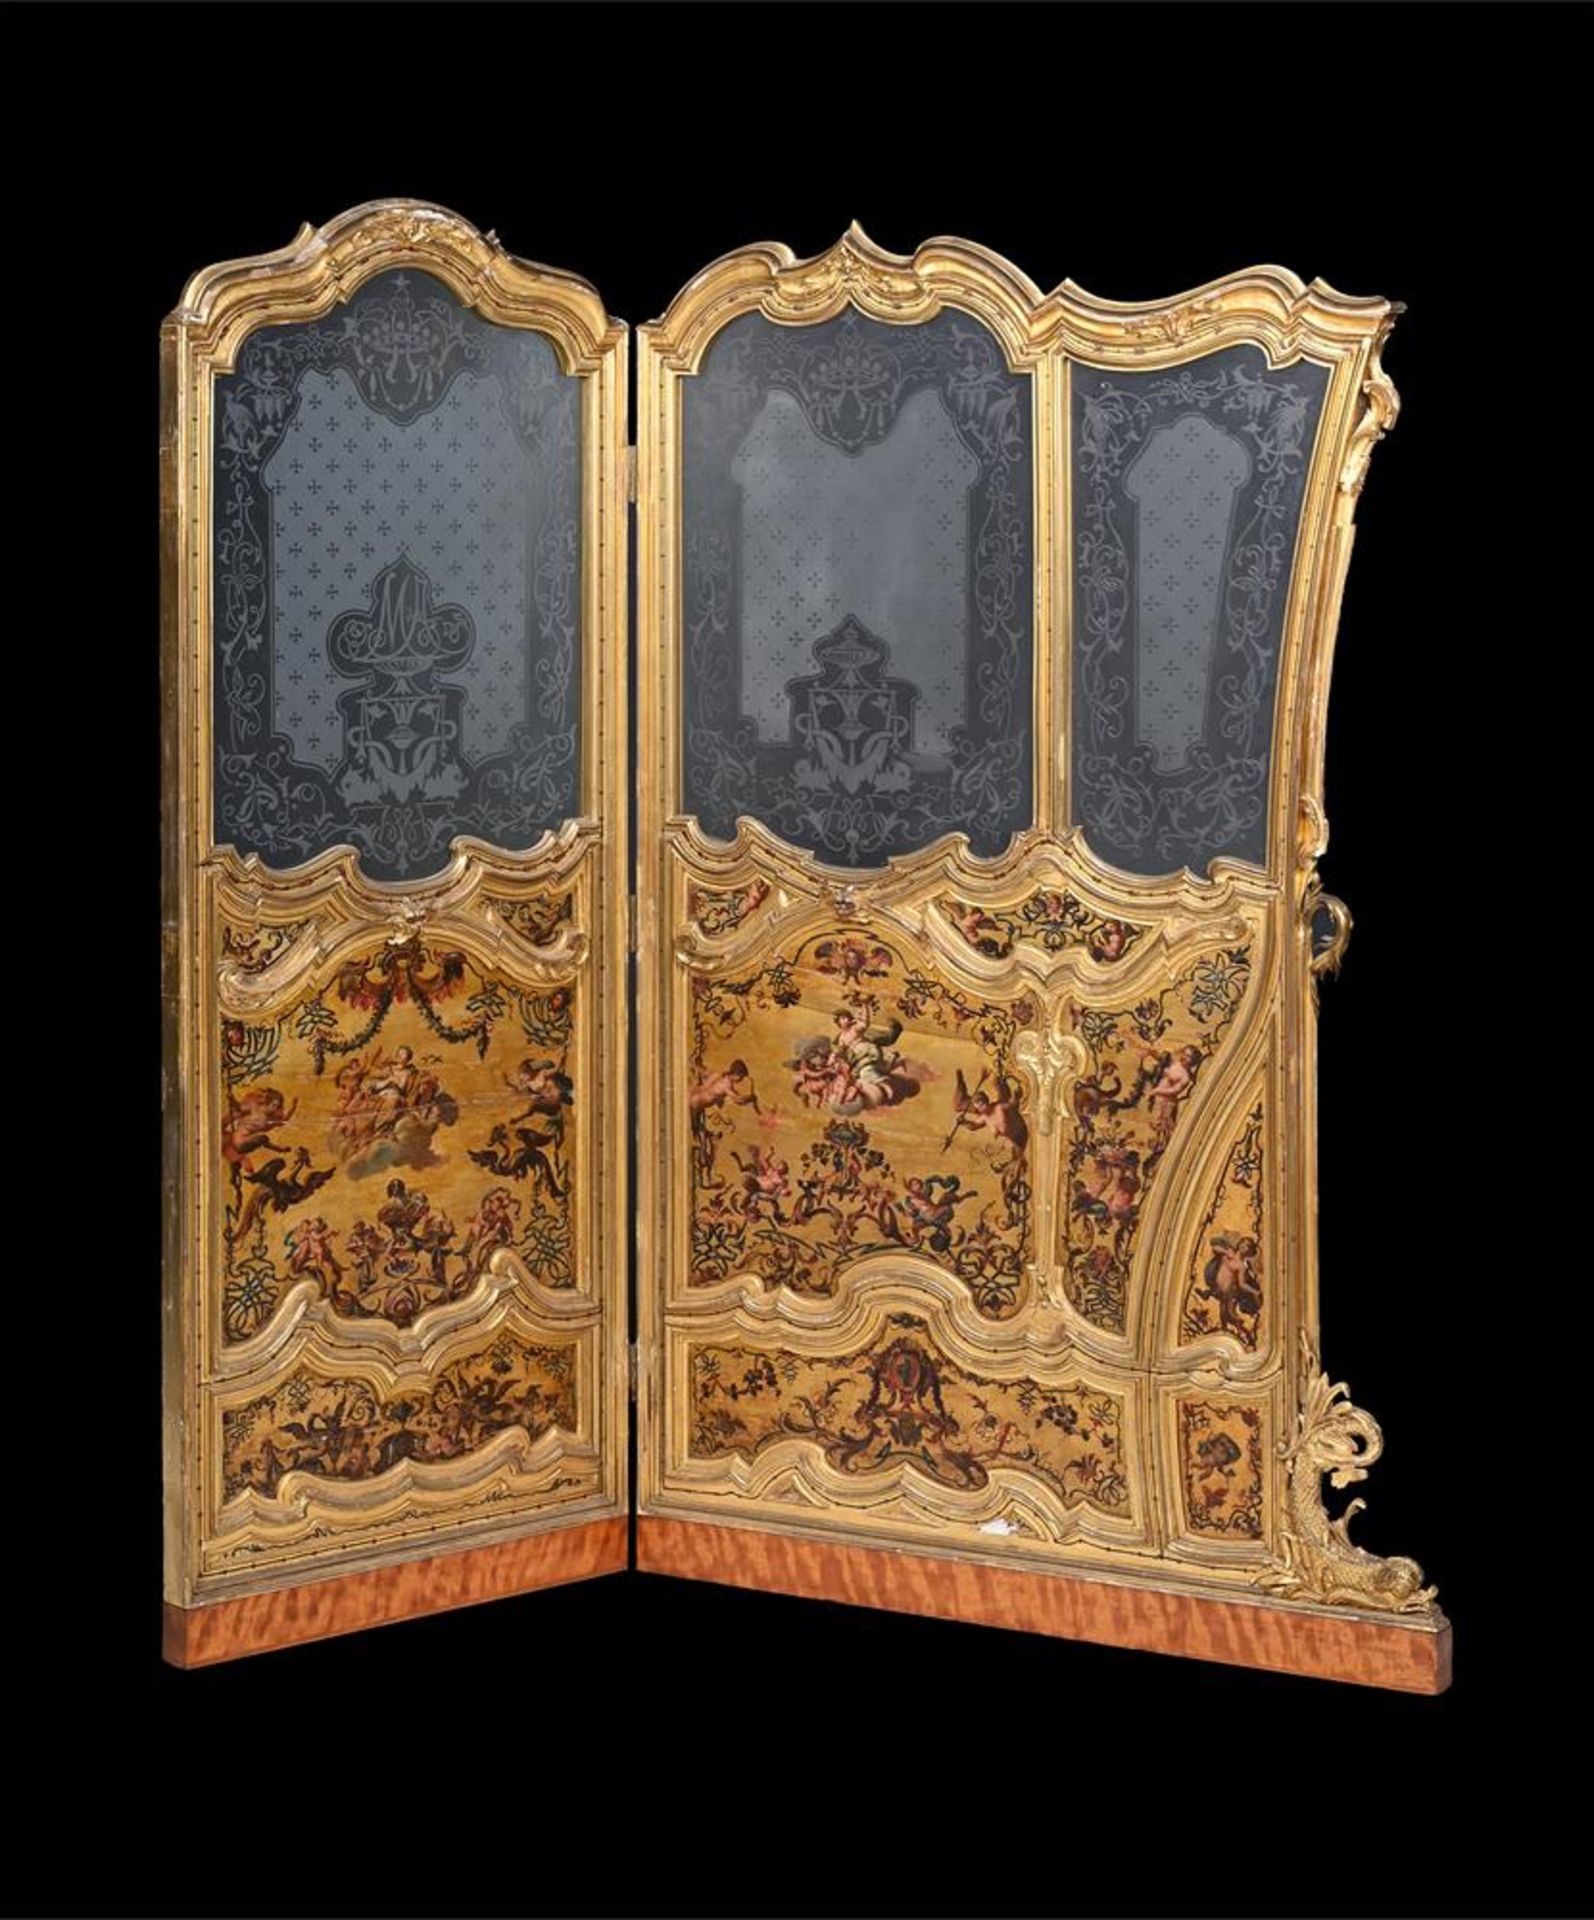 A GILTWOOD, ETCHED GLASS AND POLYCHROME PAINTED FOUR-FOLD SCREEN - Image 3 of 4